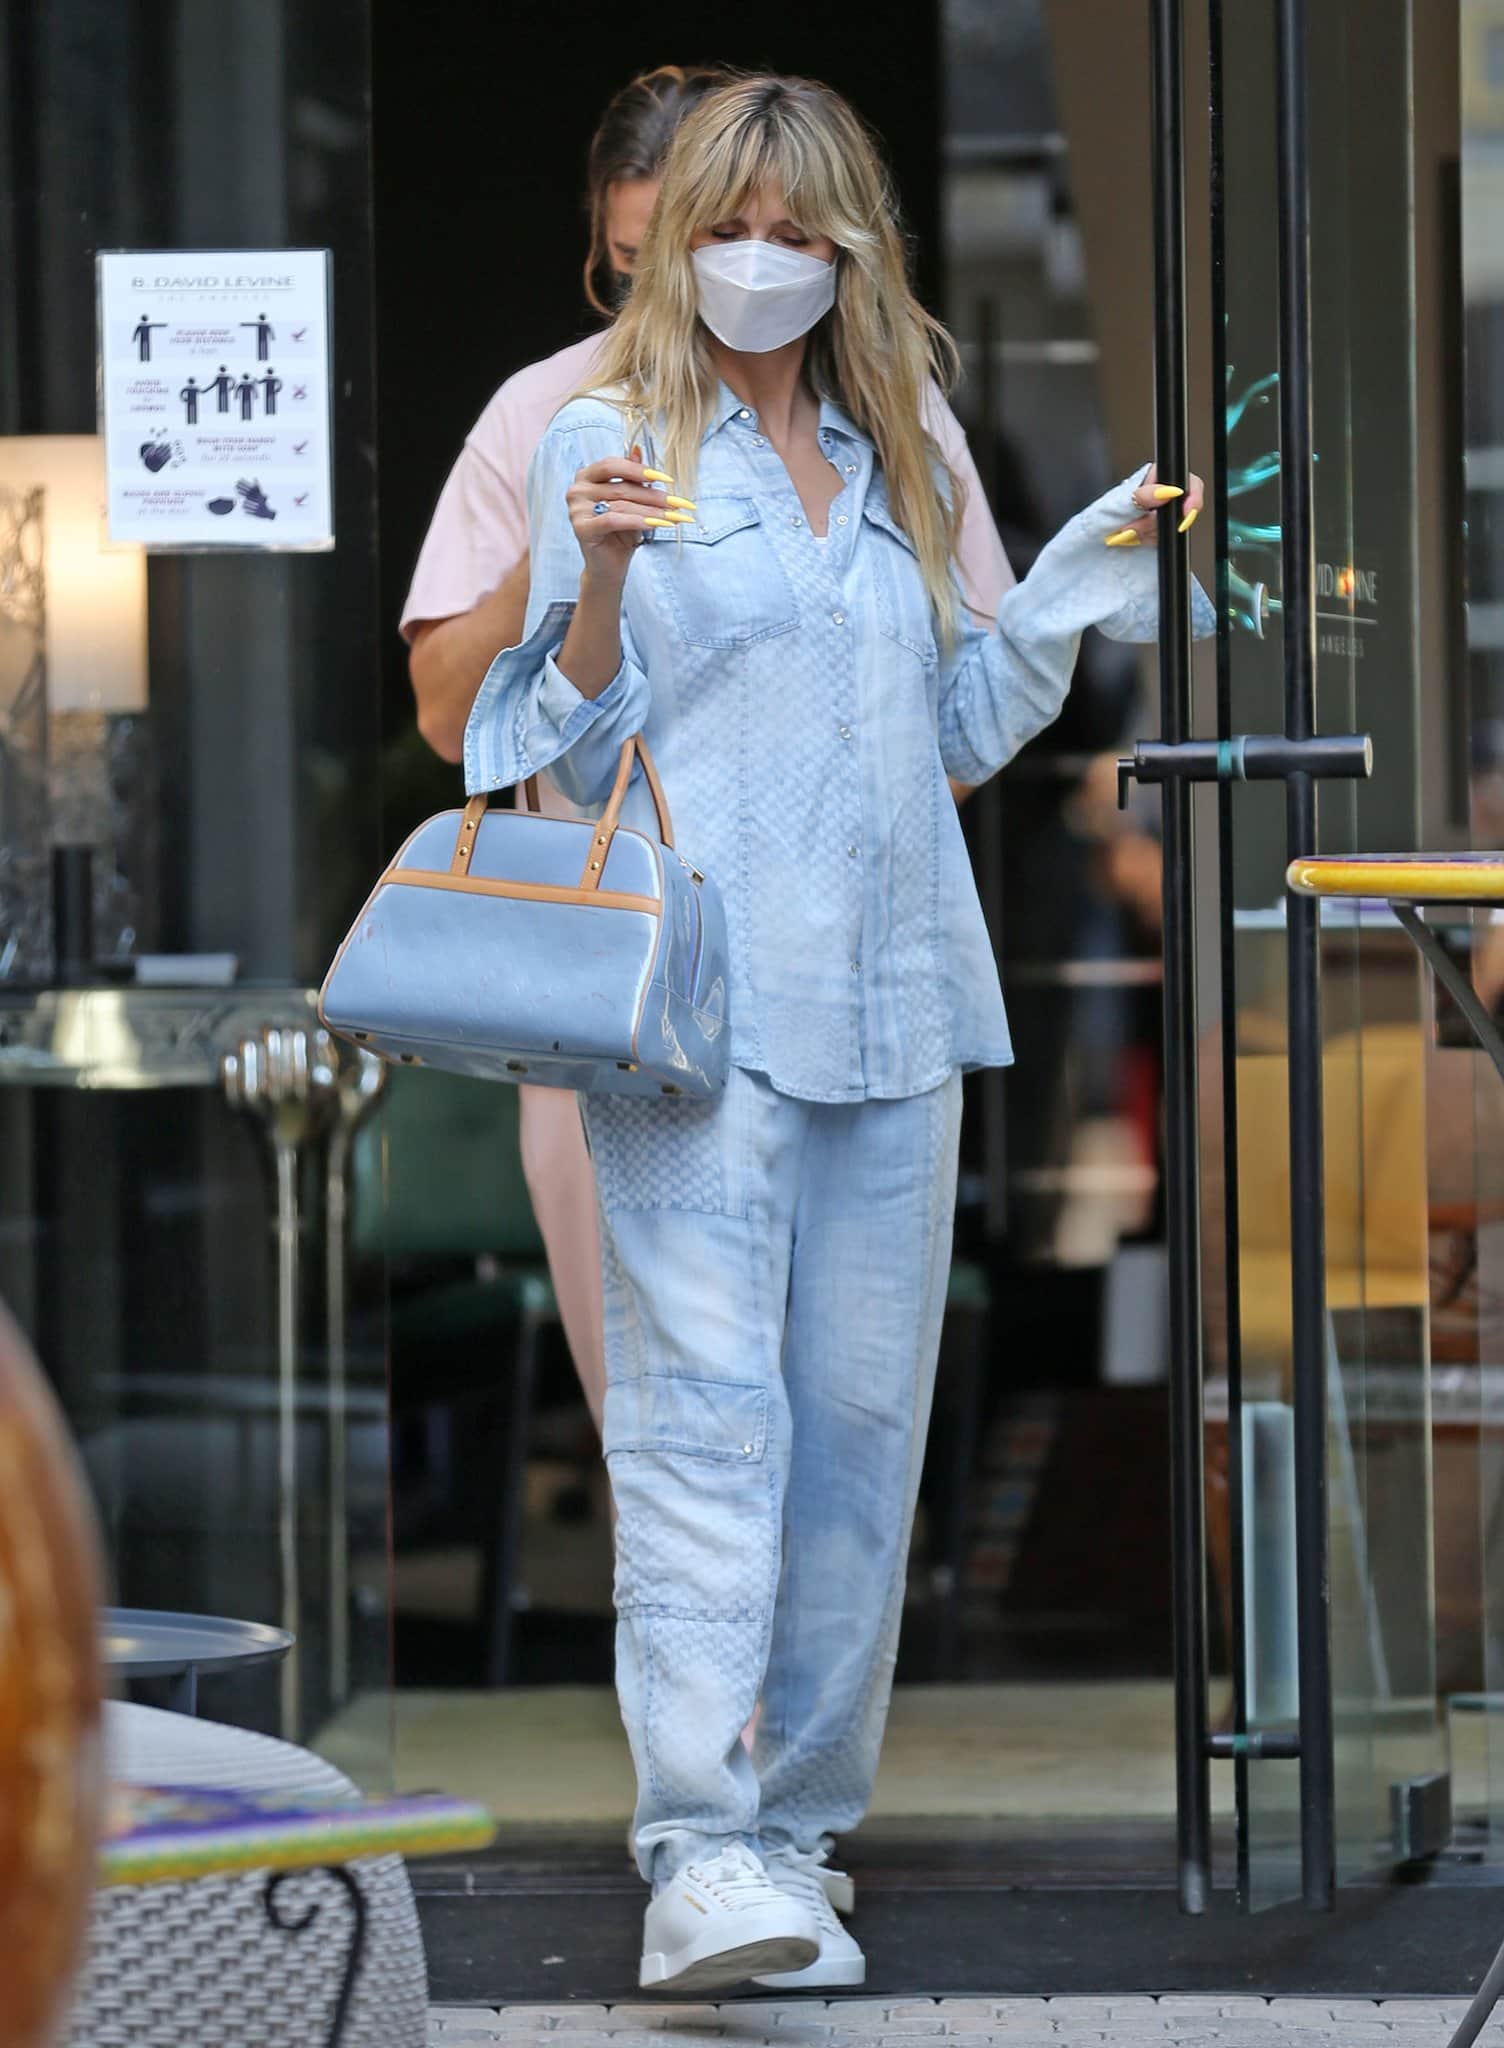 Heidi Klum opts for a denim-on-denim look with a Lala Berlin shirt and cargo pants